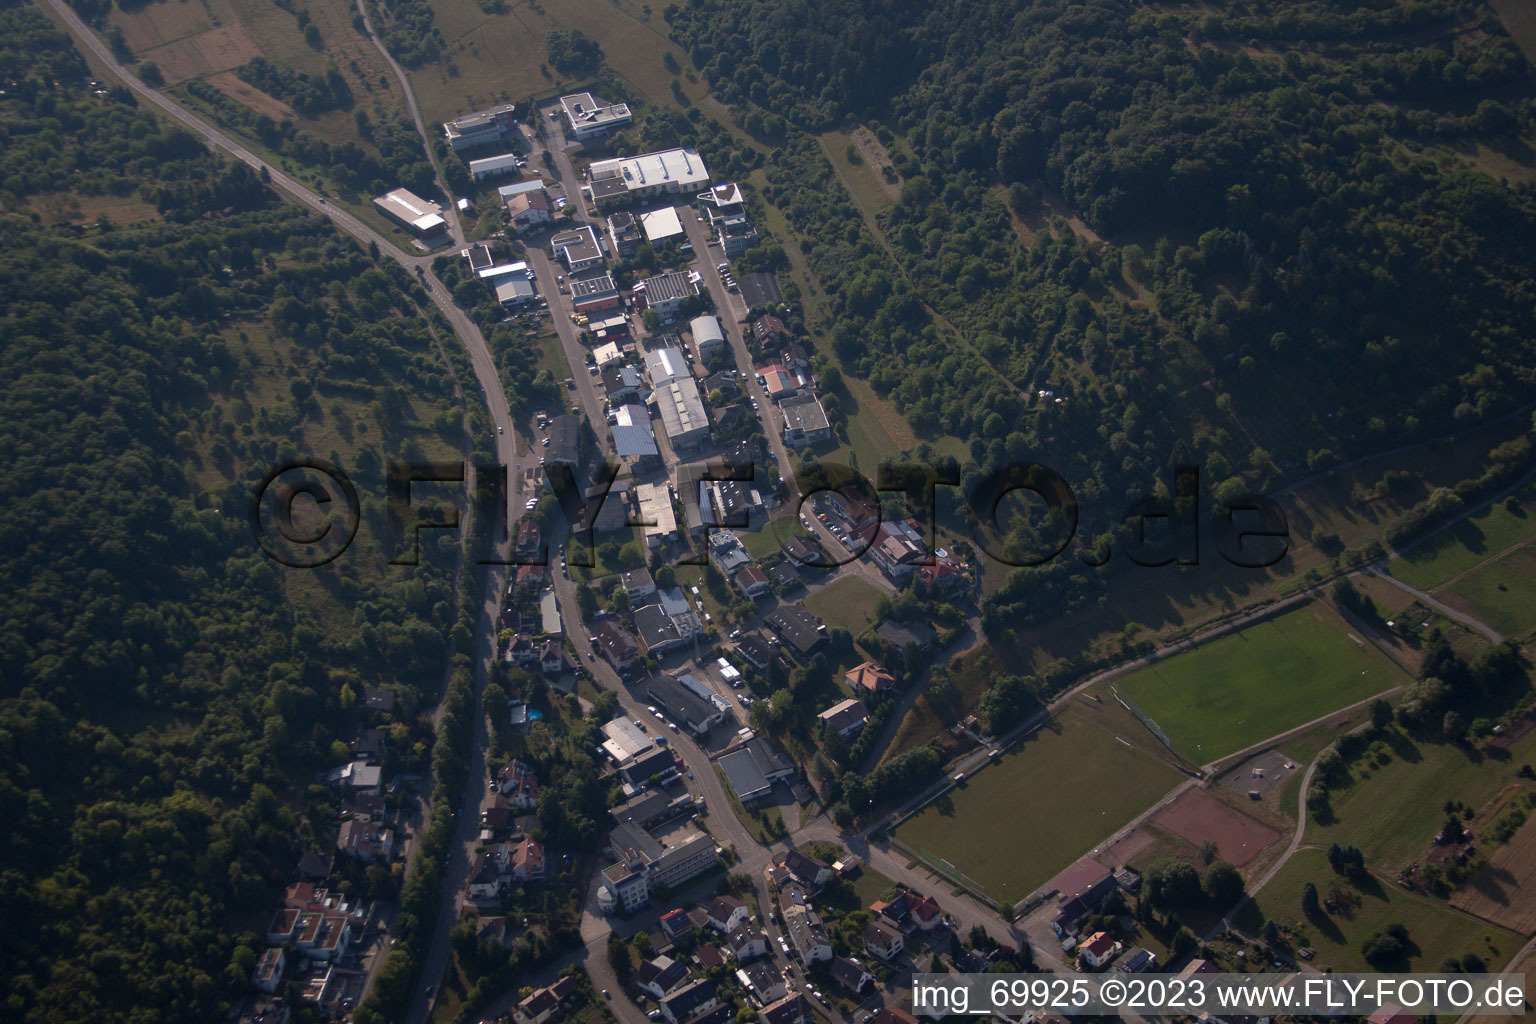 Dietlingen in the state Baden-Wuerttemberg, Germany seen from above